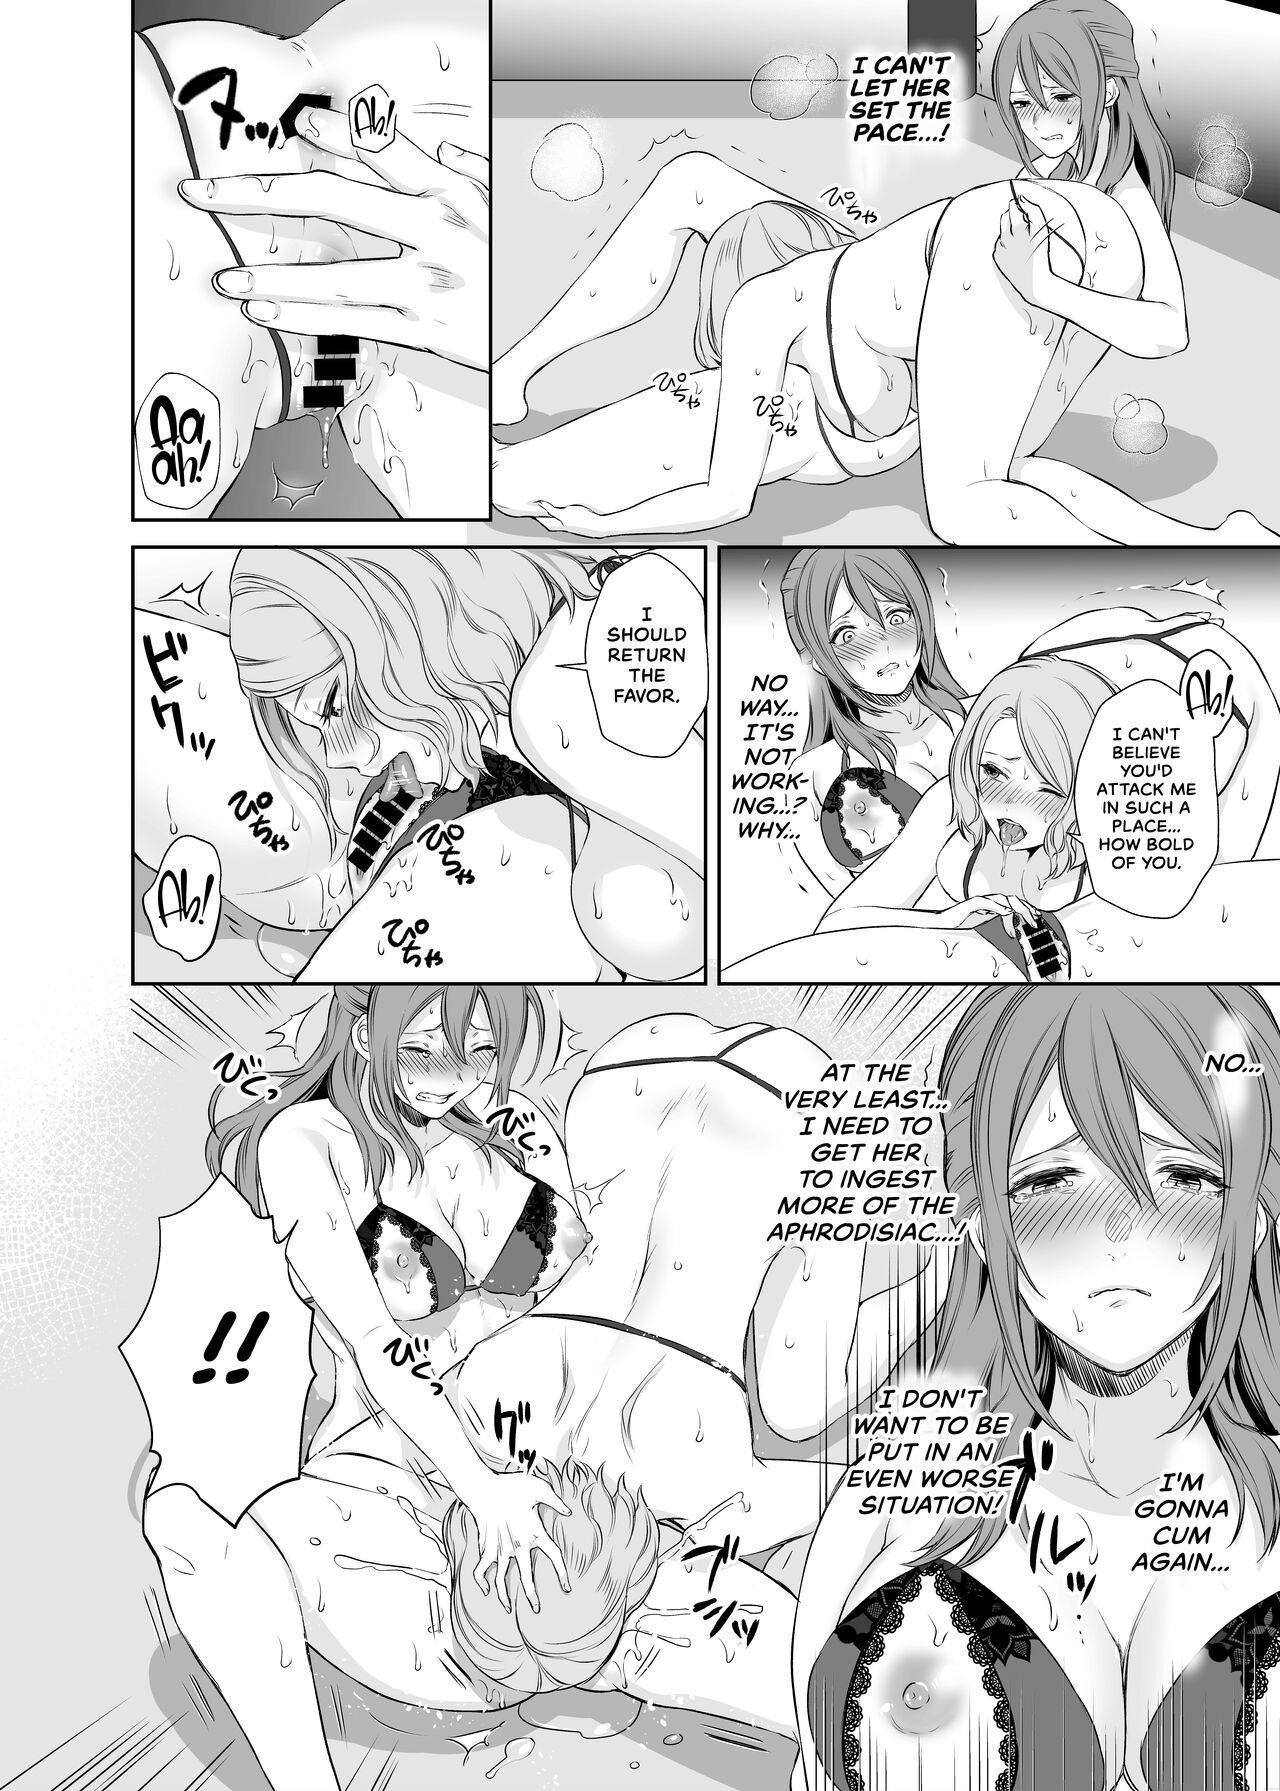 Thot [Remora Works (Meriko)] LesFes Co -Candid Reporting- Vol. 003 [English] - Original Amateur - Page 11